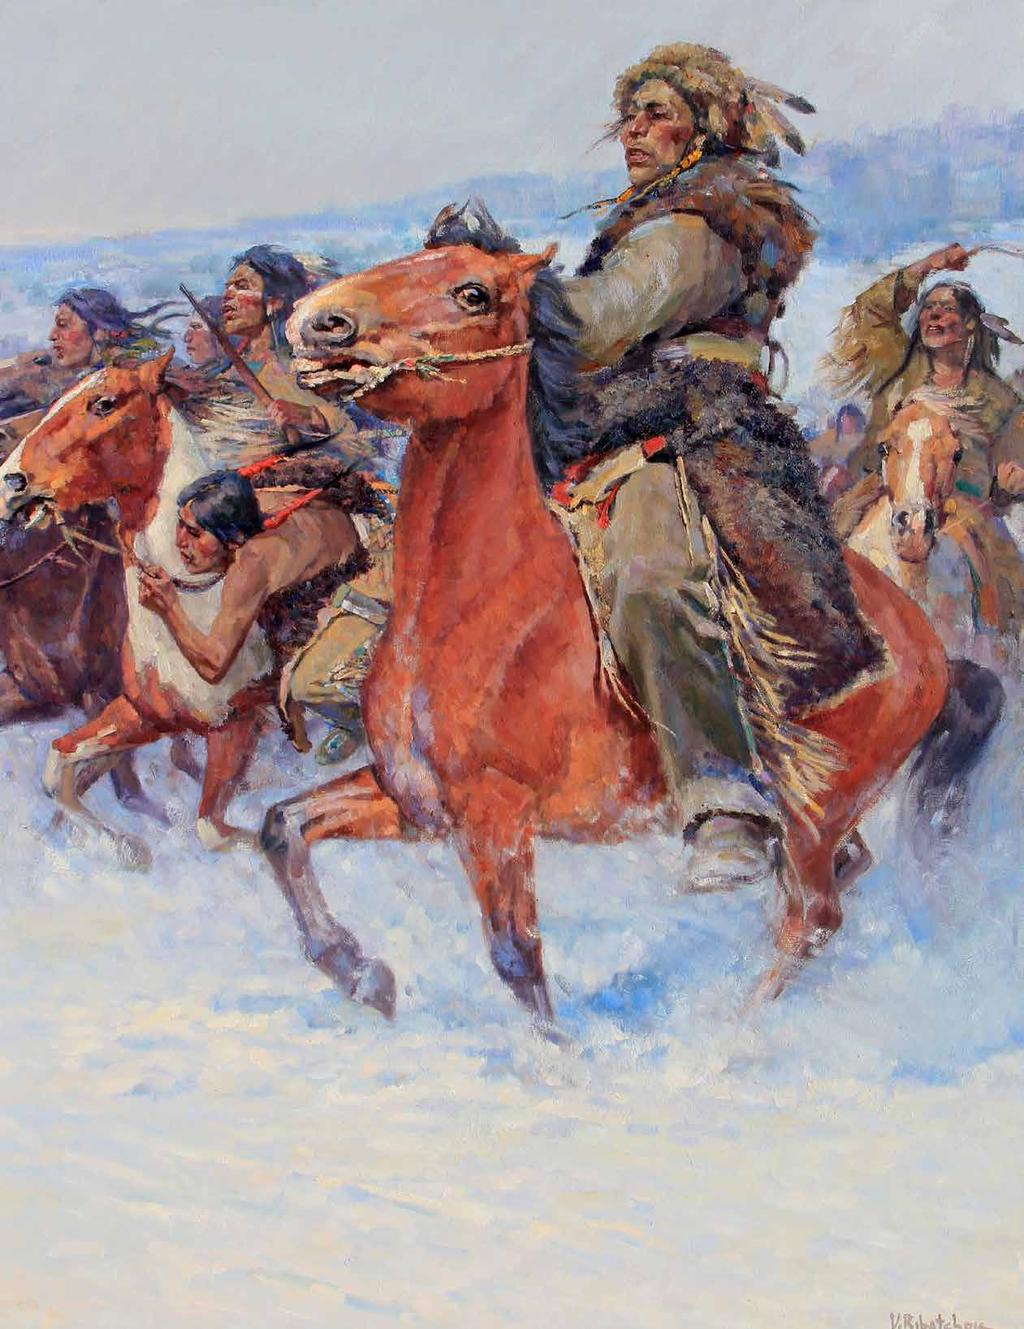 above, Winter Games of the Young Braves, oil on canvas, 36" x 30" right, Sioux Trails, oil on canvas, 22" x 28" my teacher.